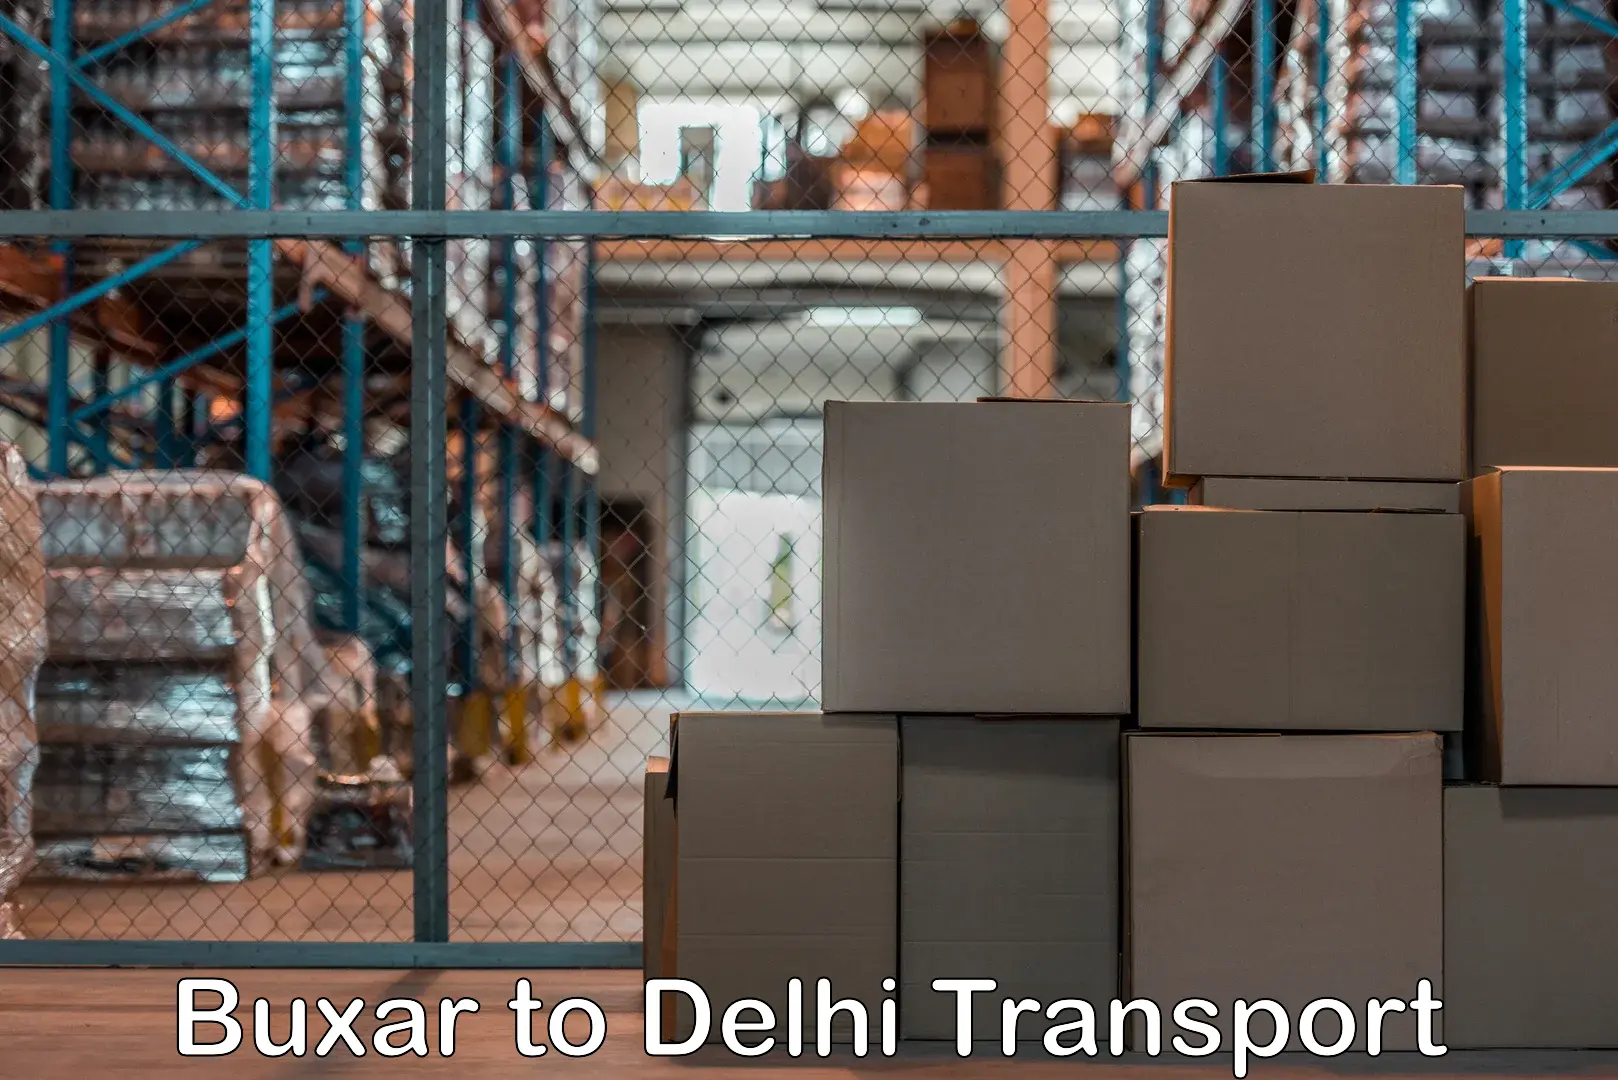 Daily parcel service transport Buxar to NCR